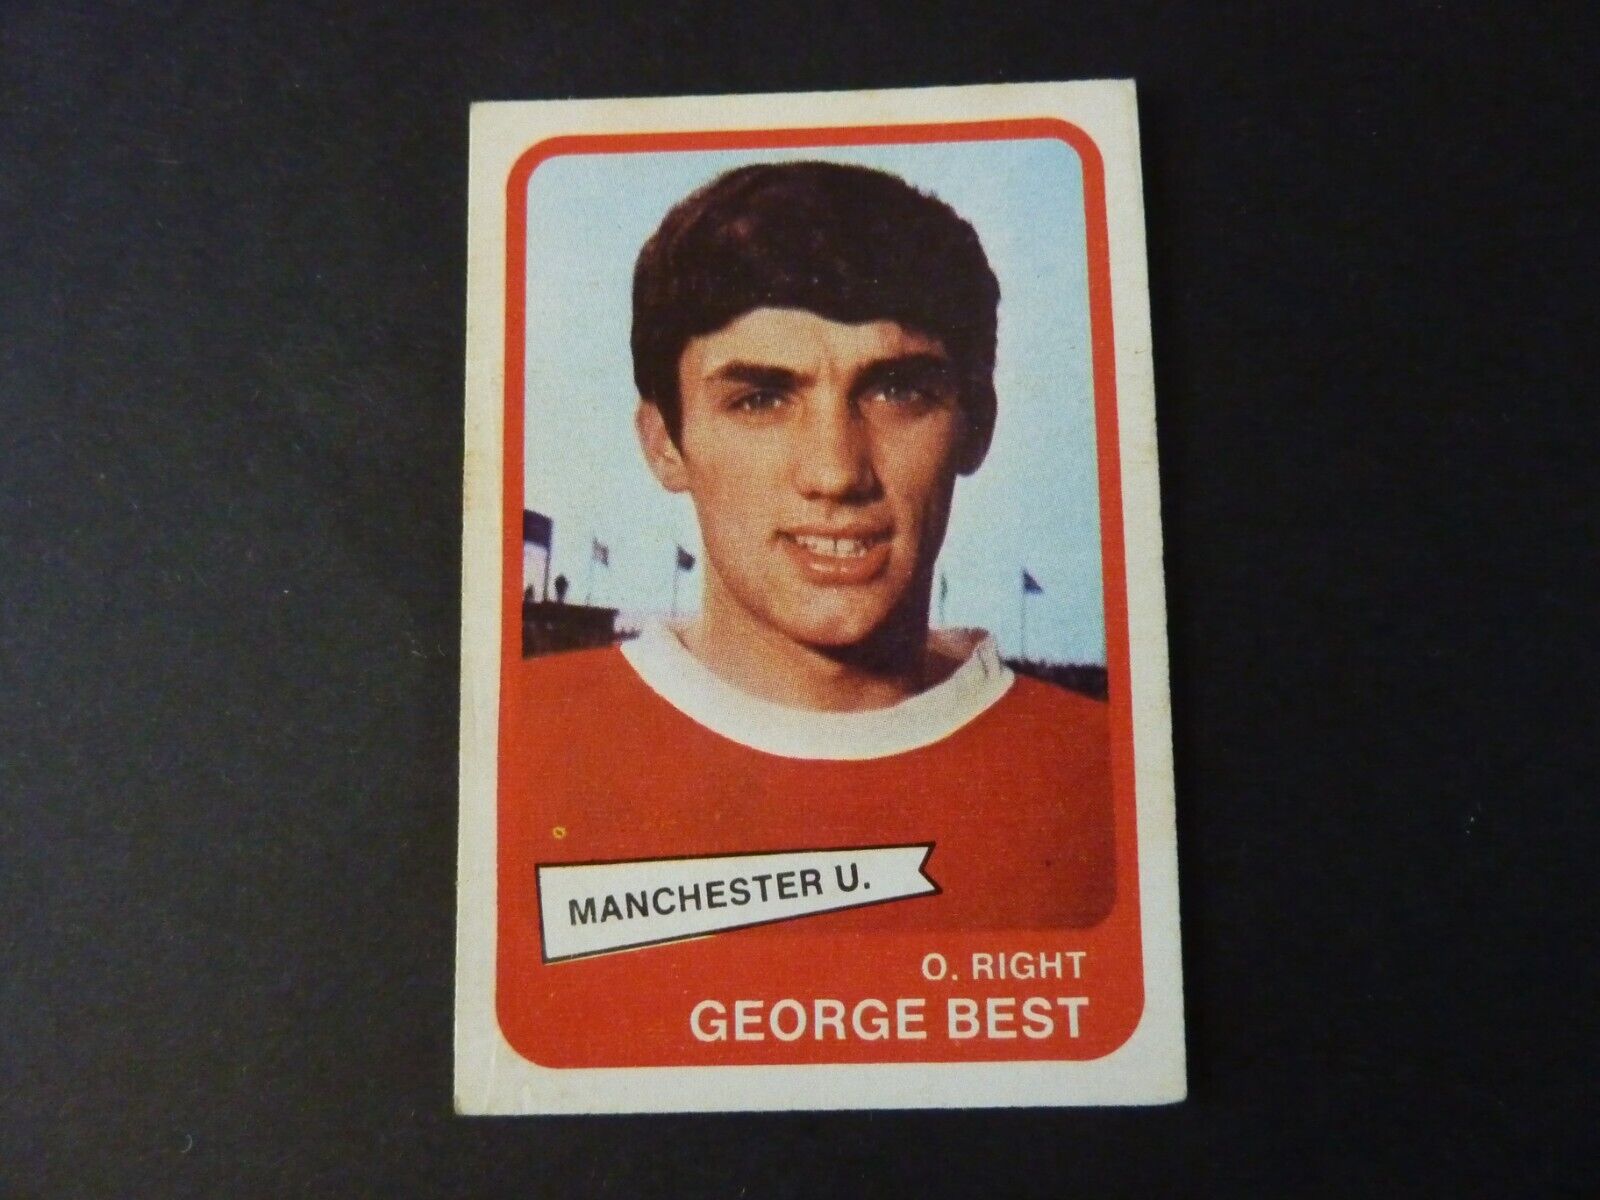 George Best A&BC Yellow Backed Football Card from 1968 - VGC No 44 - Man Utd